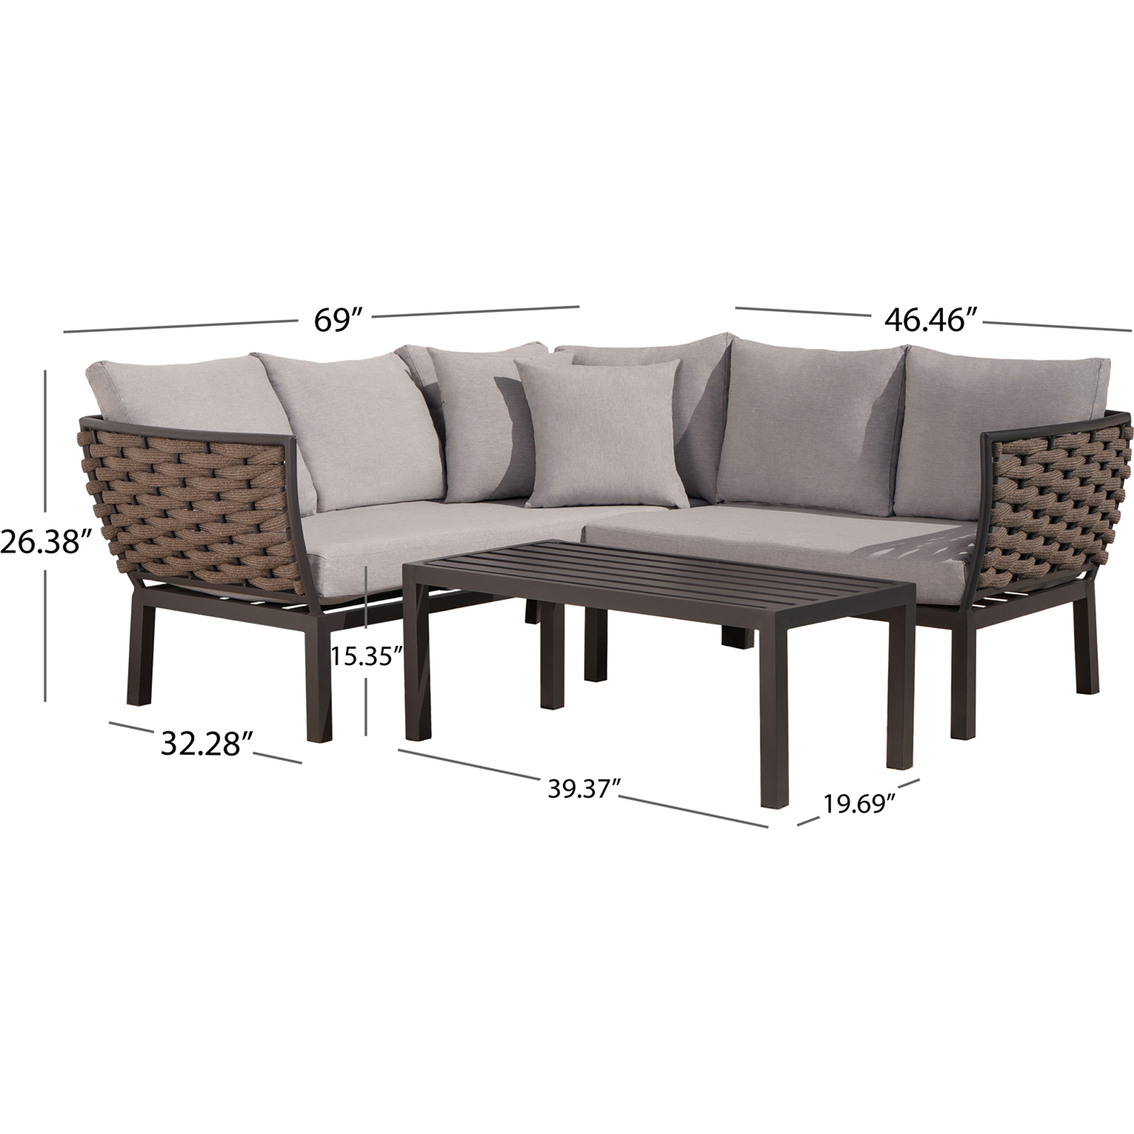 Abbyson Betsy Outdoor Seating with Coffee Table 3 pc. Set Light Grey - Image 10 of 10